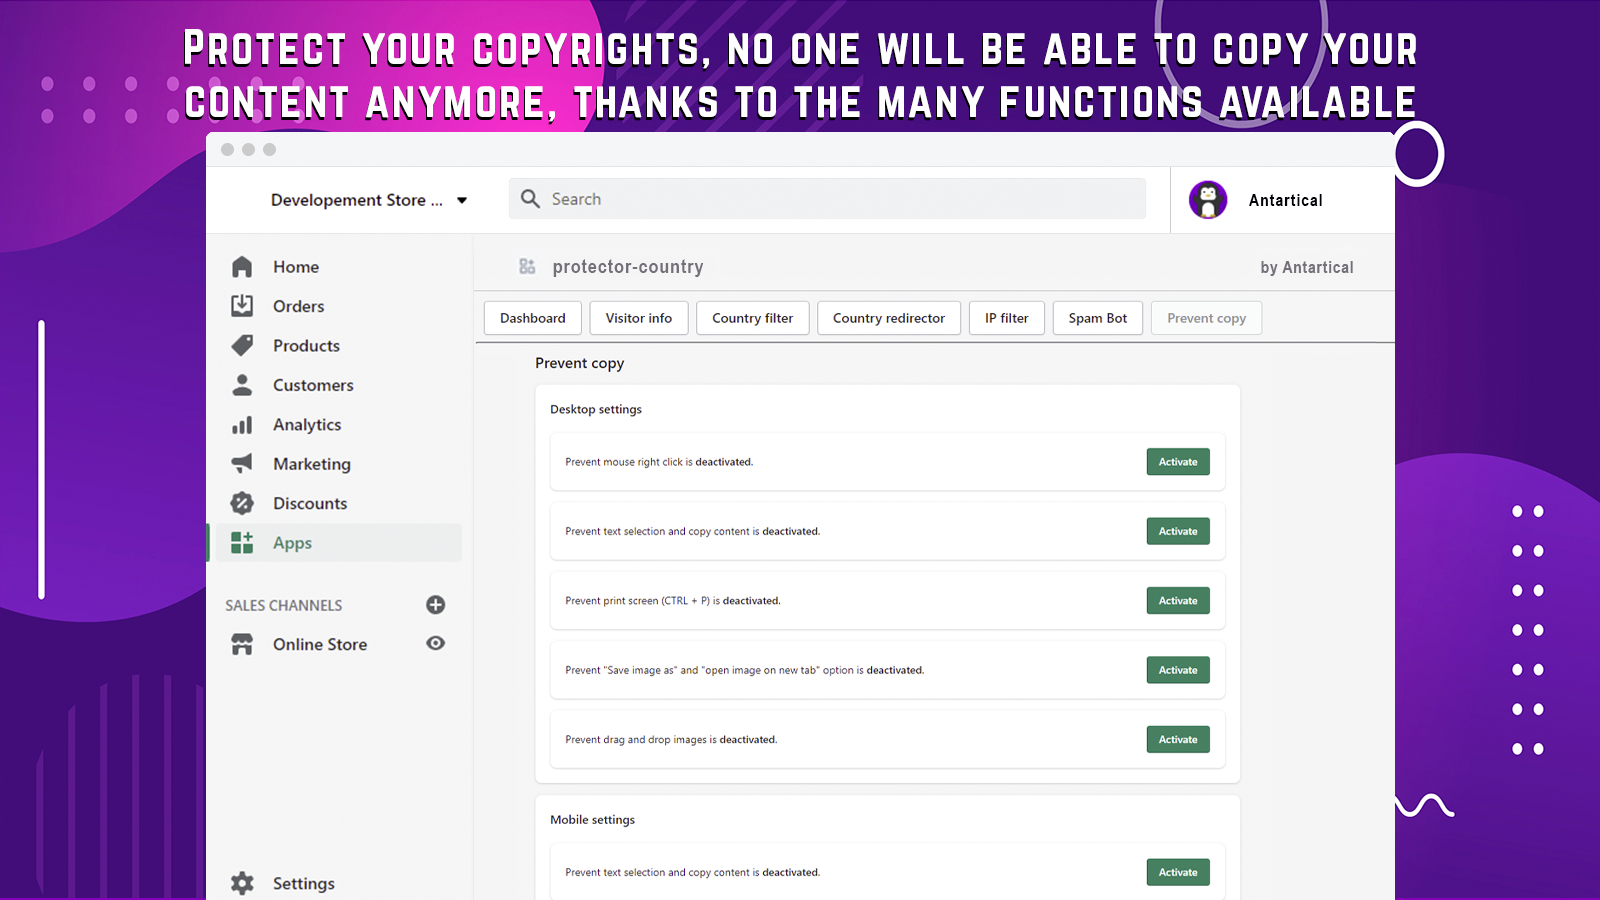 Protect your copyrights